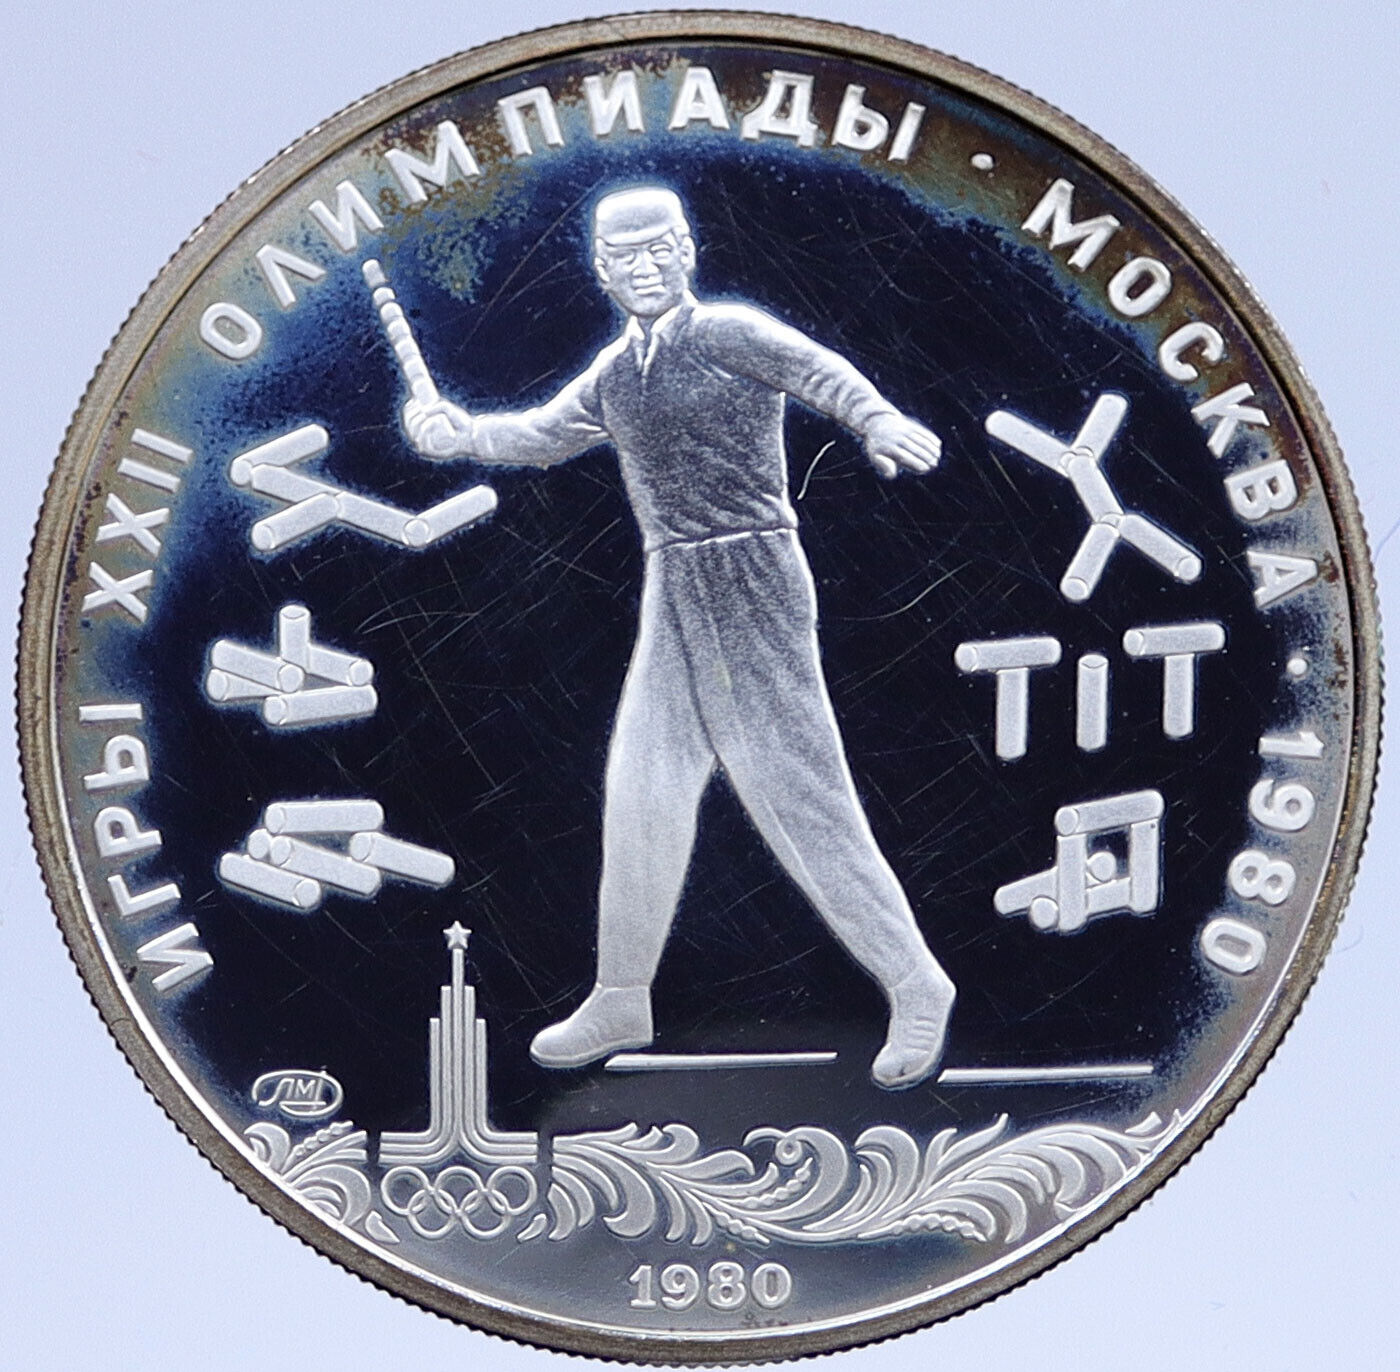 1980 RUSSIA MOSCOW SUMMER OLYMPICS Throwing Silver Proof 5 Roubles Coin i118948